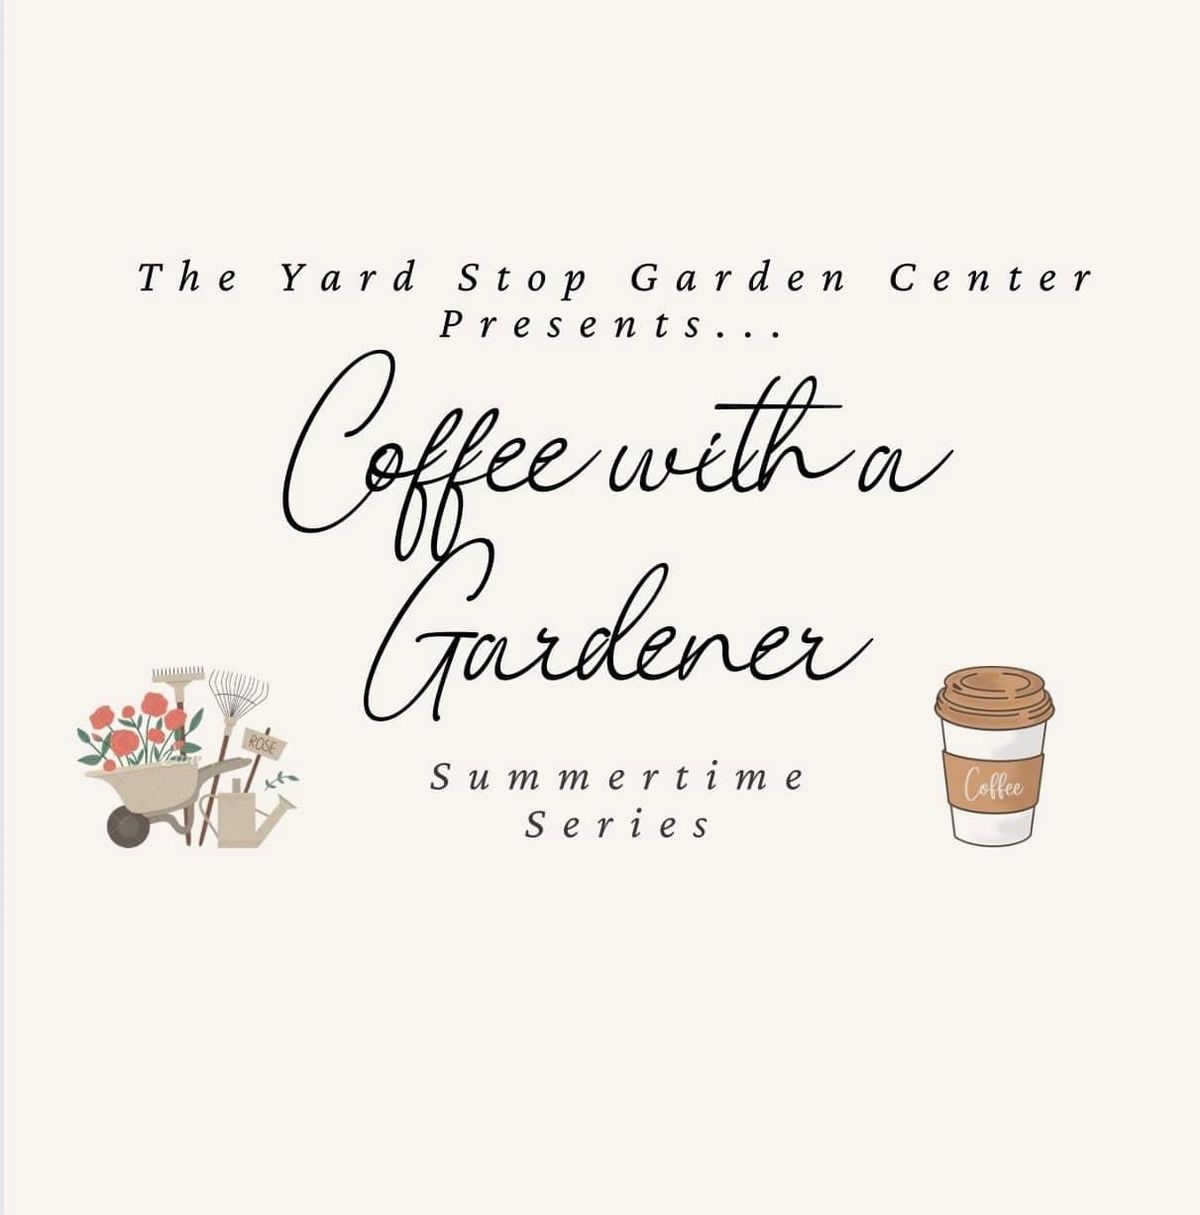 Coffee with a Gardener (FREE!)